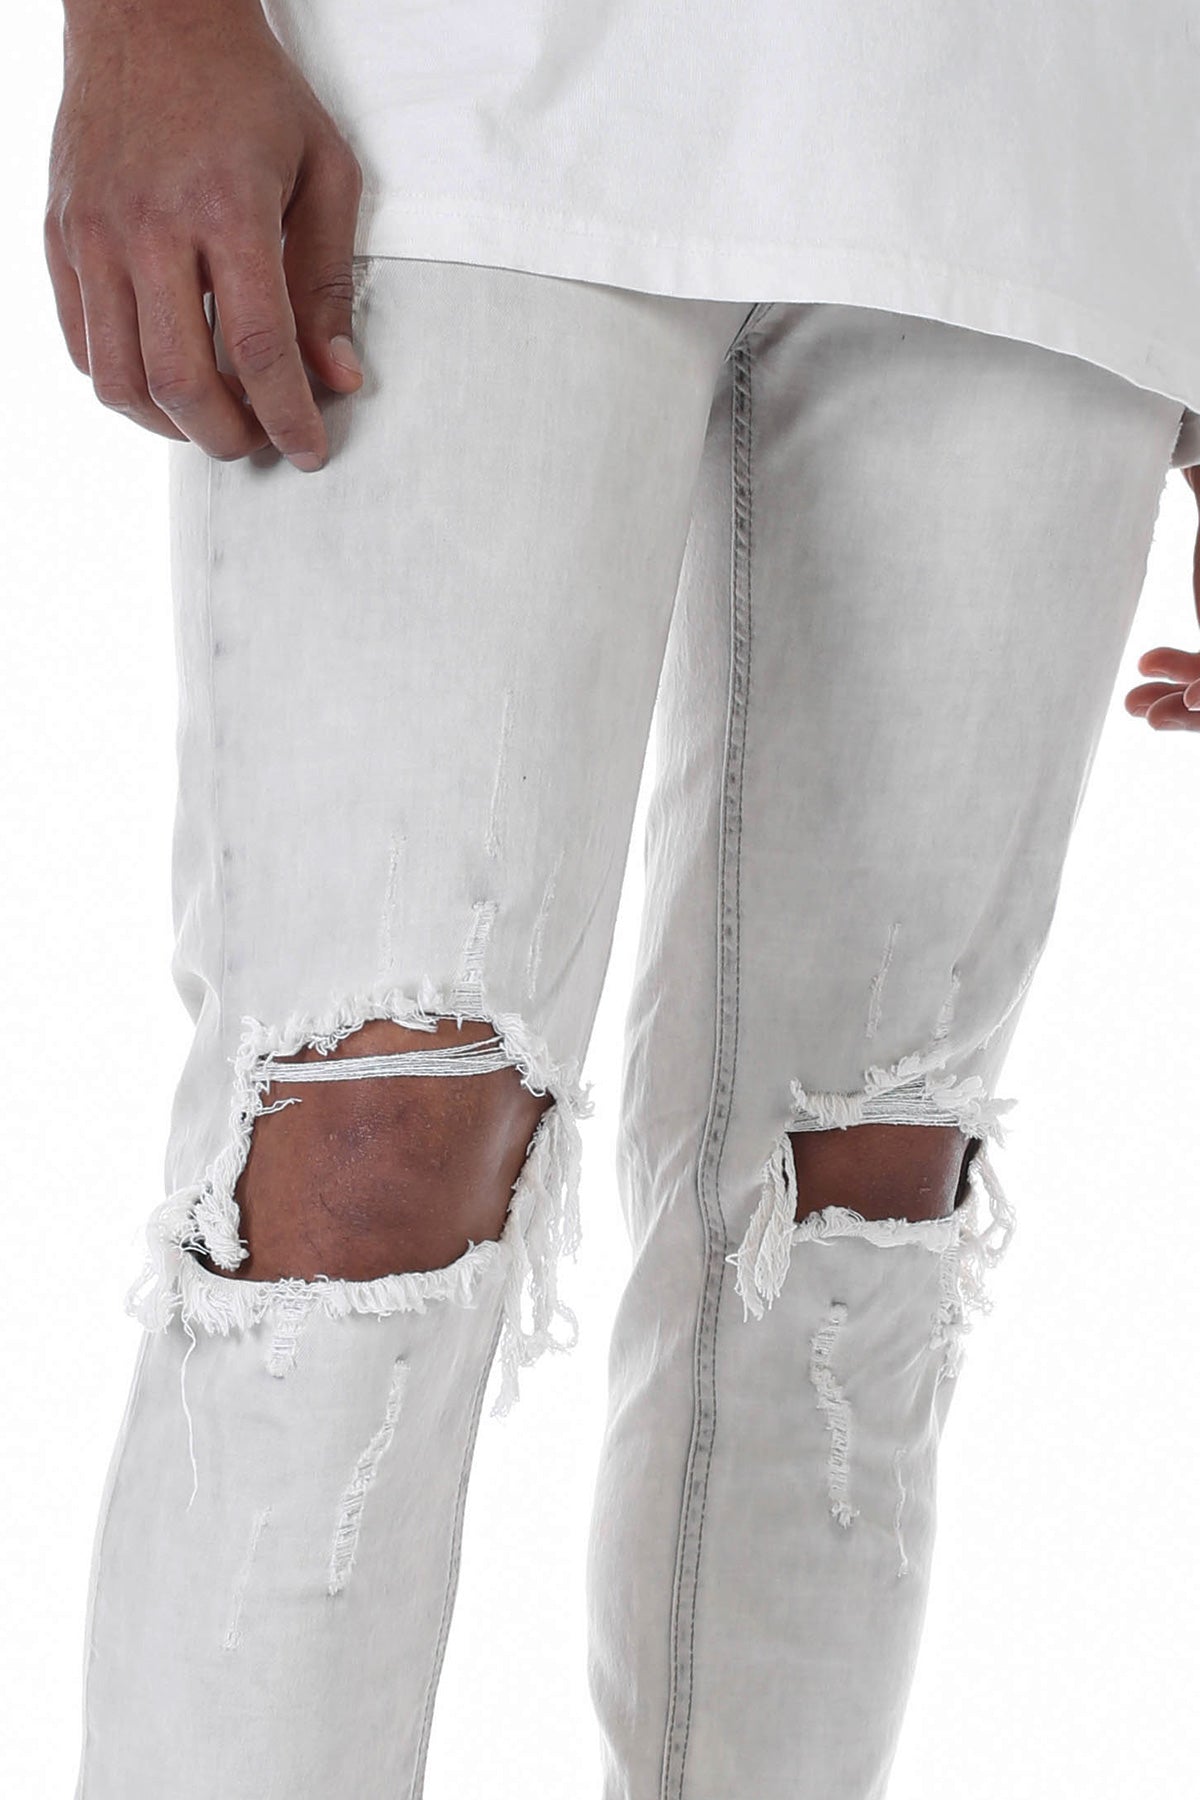 GREY DISTRESSED ANKLE ZIP JEANS